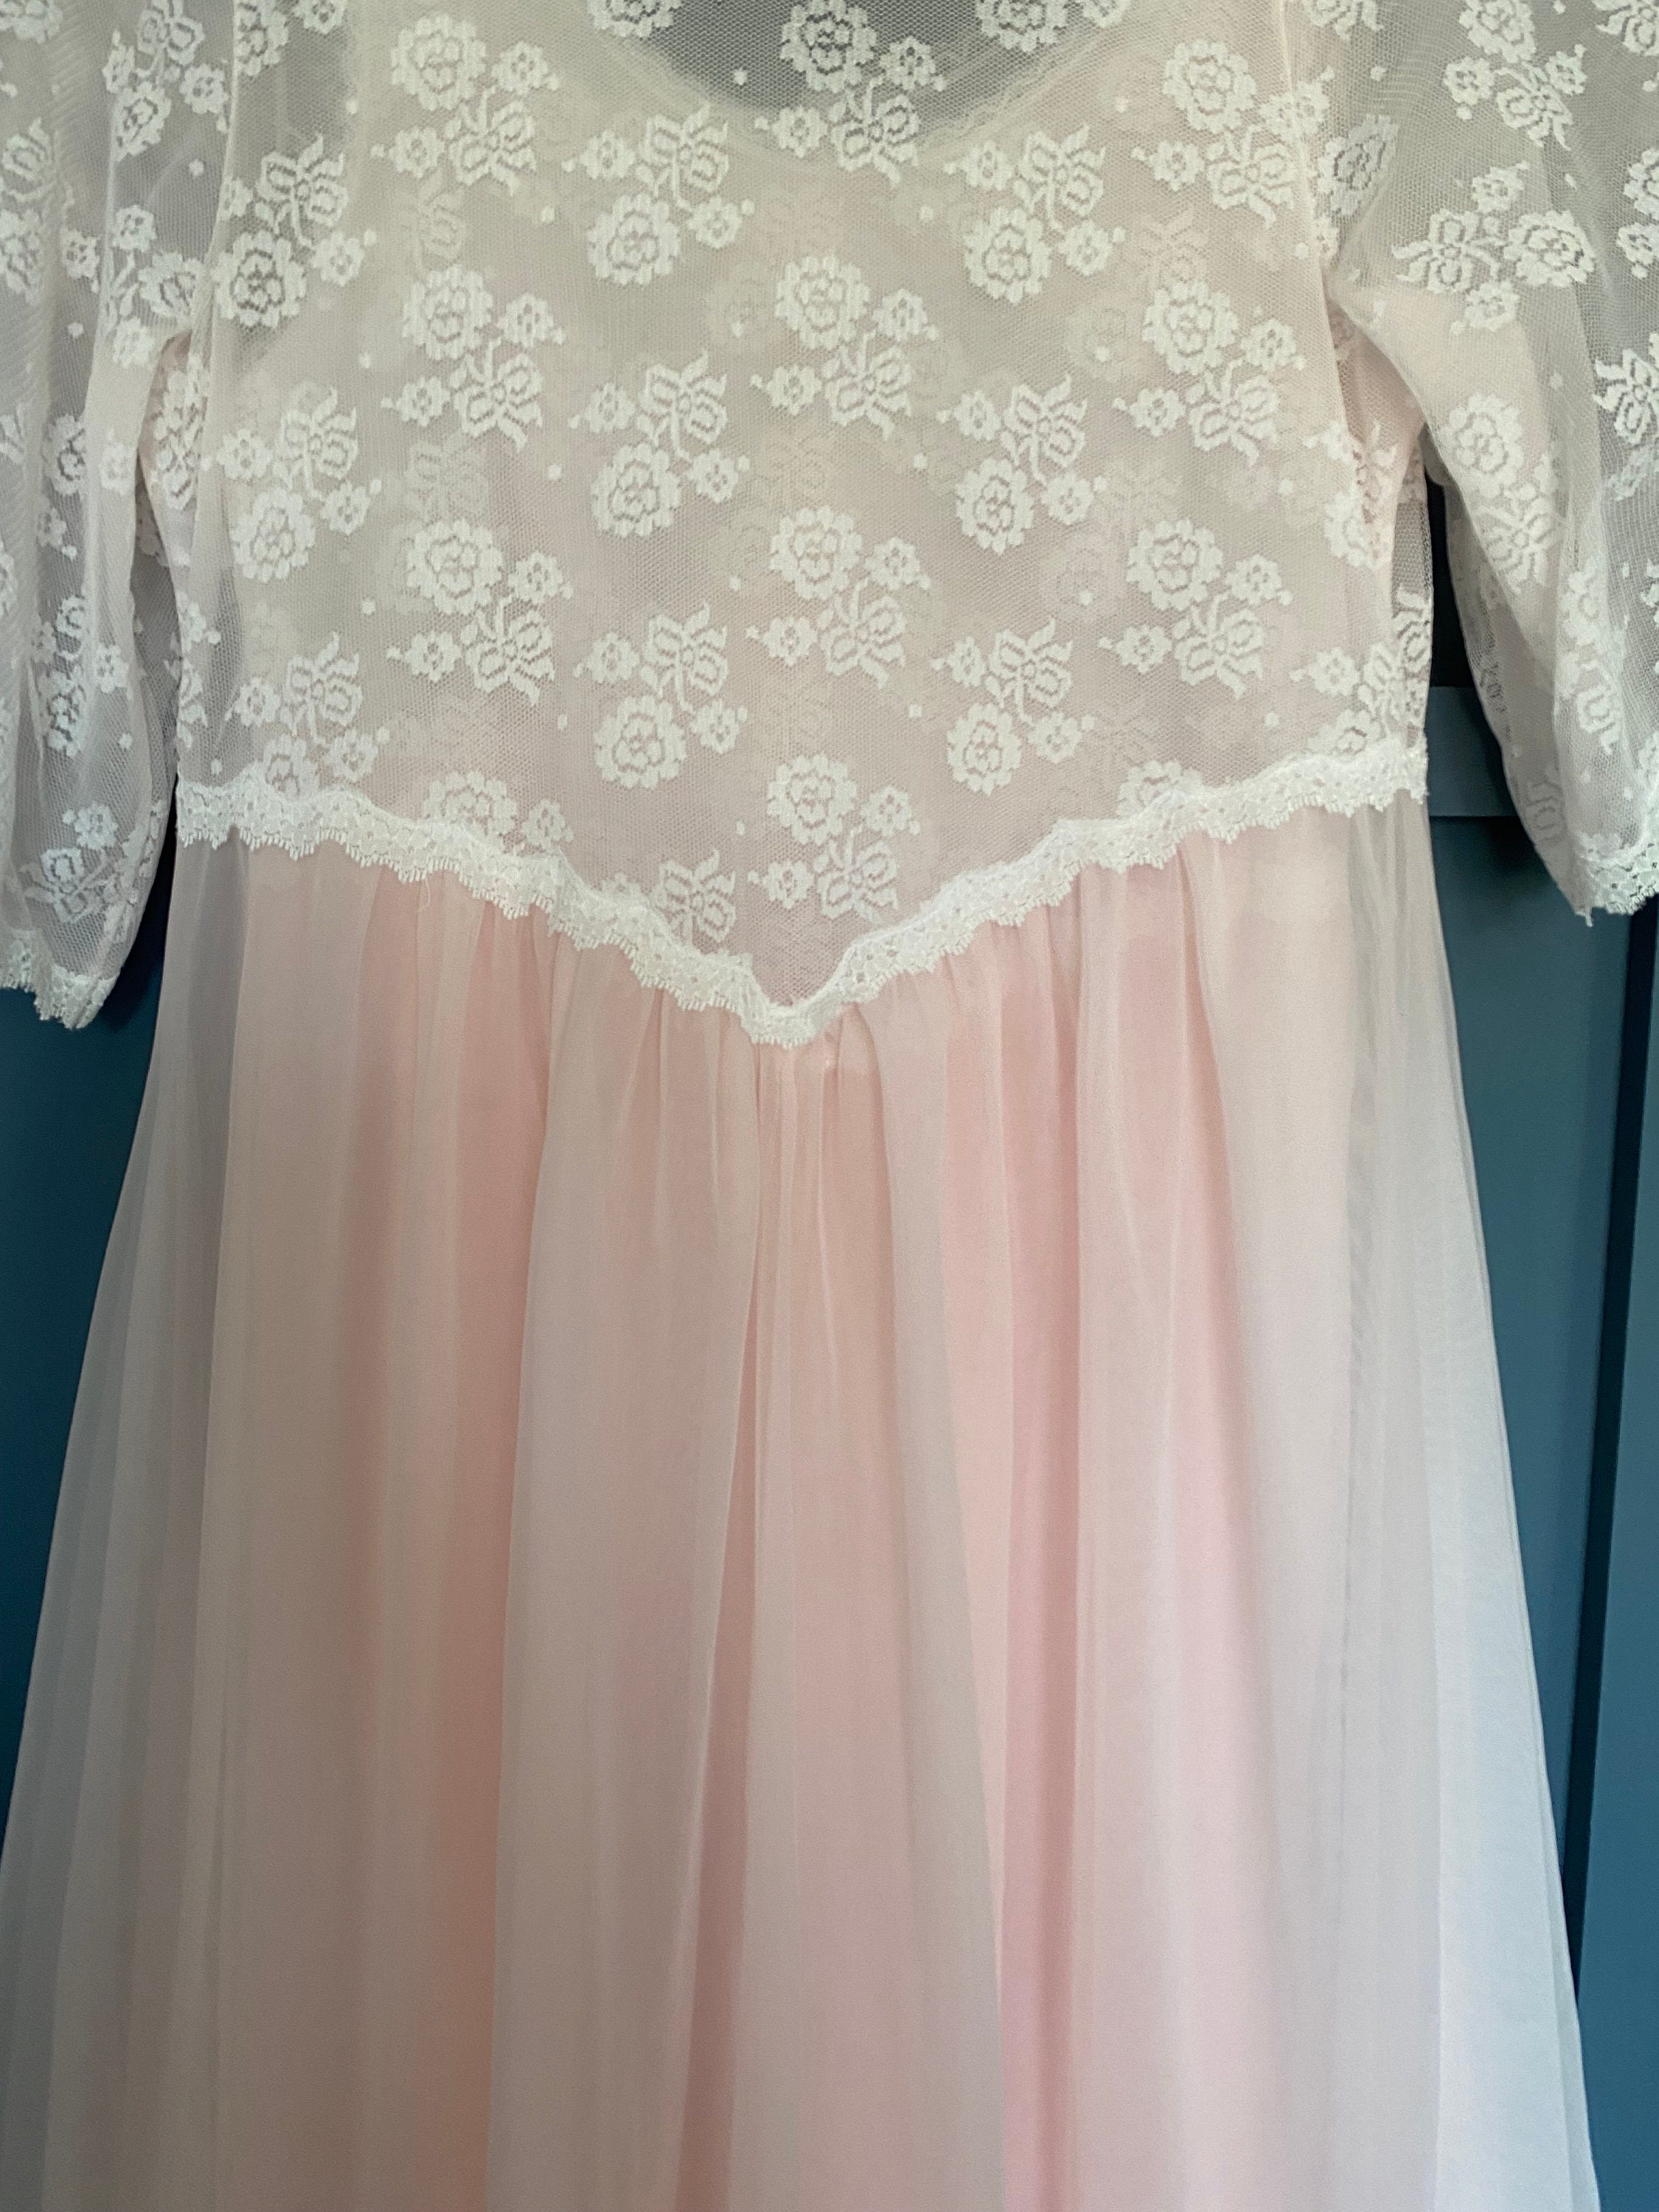 Baby Pink Chiffon Peignoir Set Vintage Lace Nightgown and | Etsy